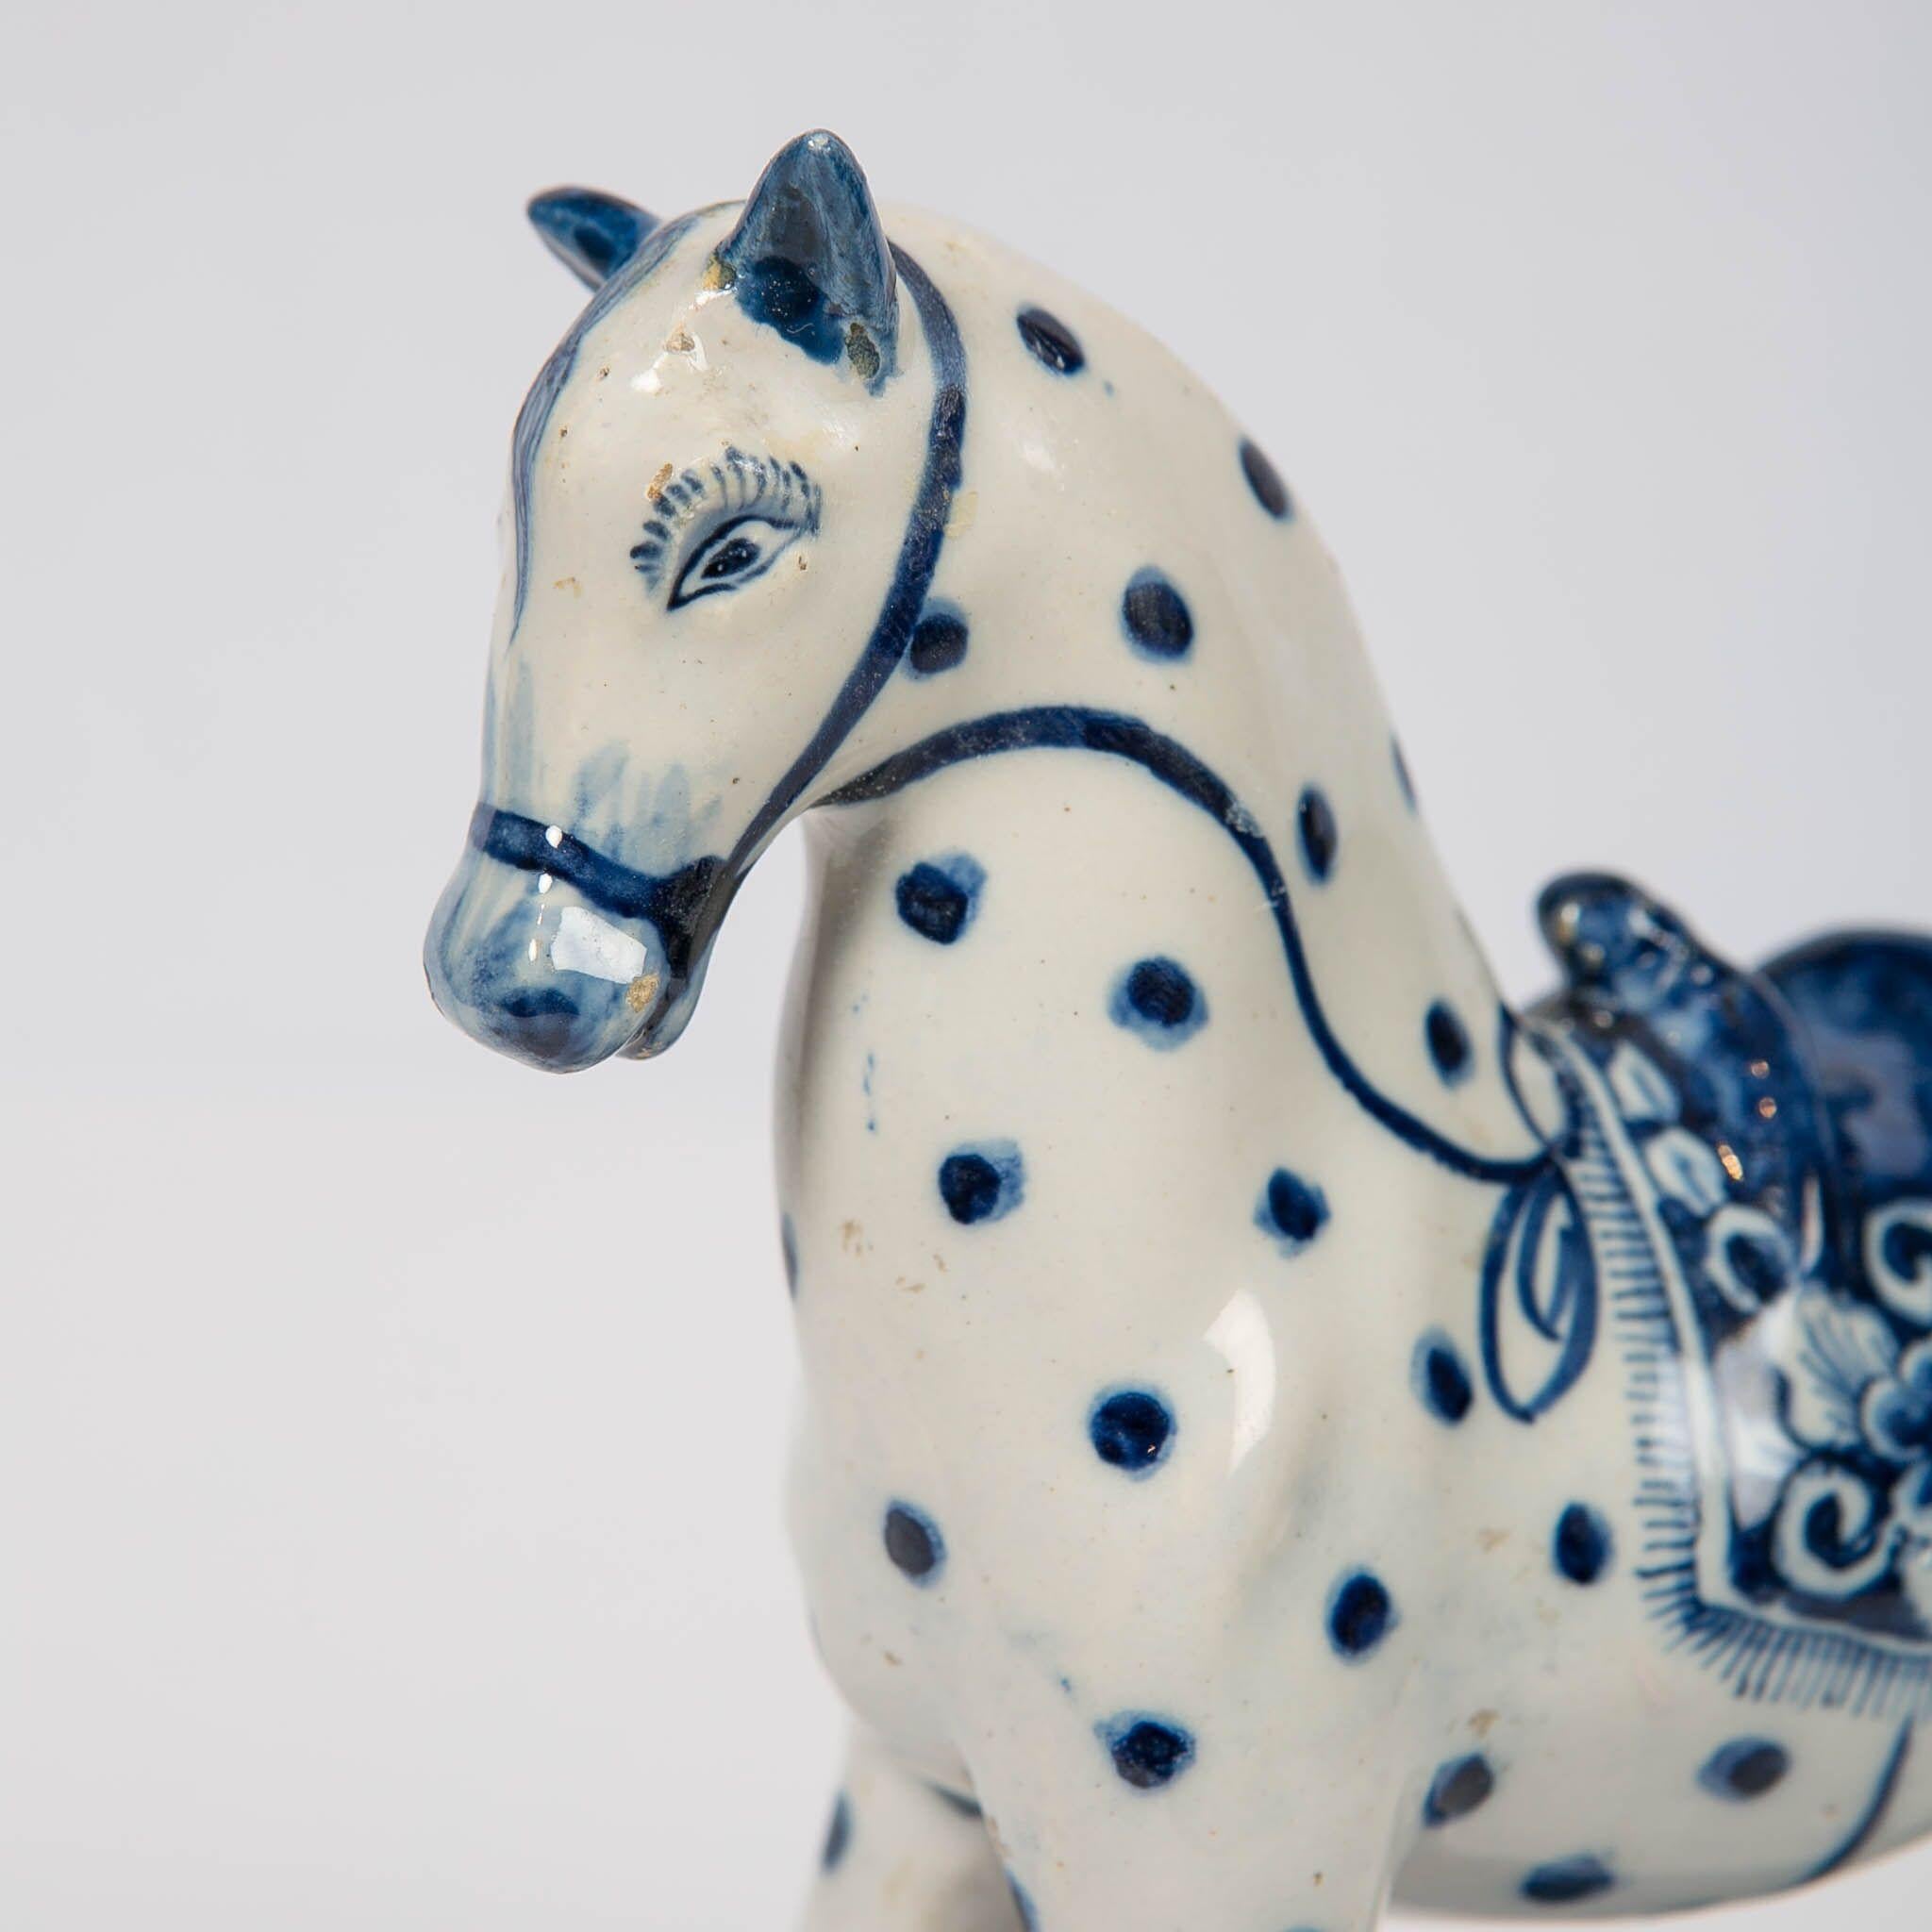 Provenance: Collection Vecht Amsterdam
A lovely 18th century Dutch Delft blue and white spotted horse is modeled prancing on a rectangular blue base. His ears point straight up; his head tilts slightly to one side as though he hears something. A